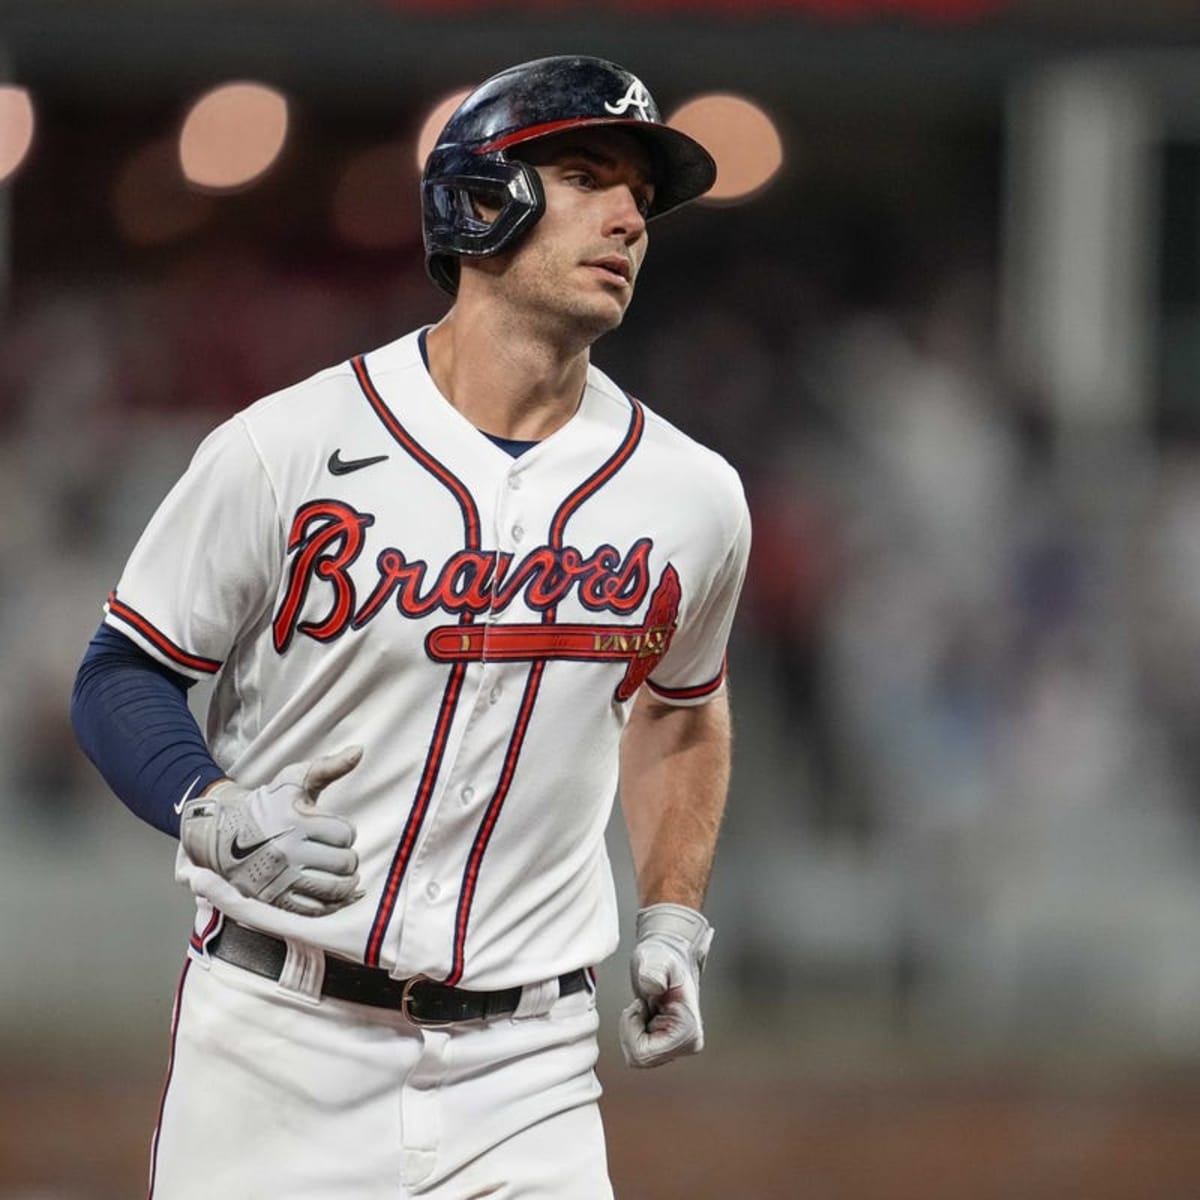 Cubs at Braves Free Live Stream MLB Online, Channel, Time - How to Watch and Stream Major League and College Sports